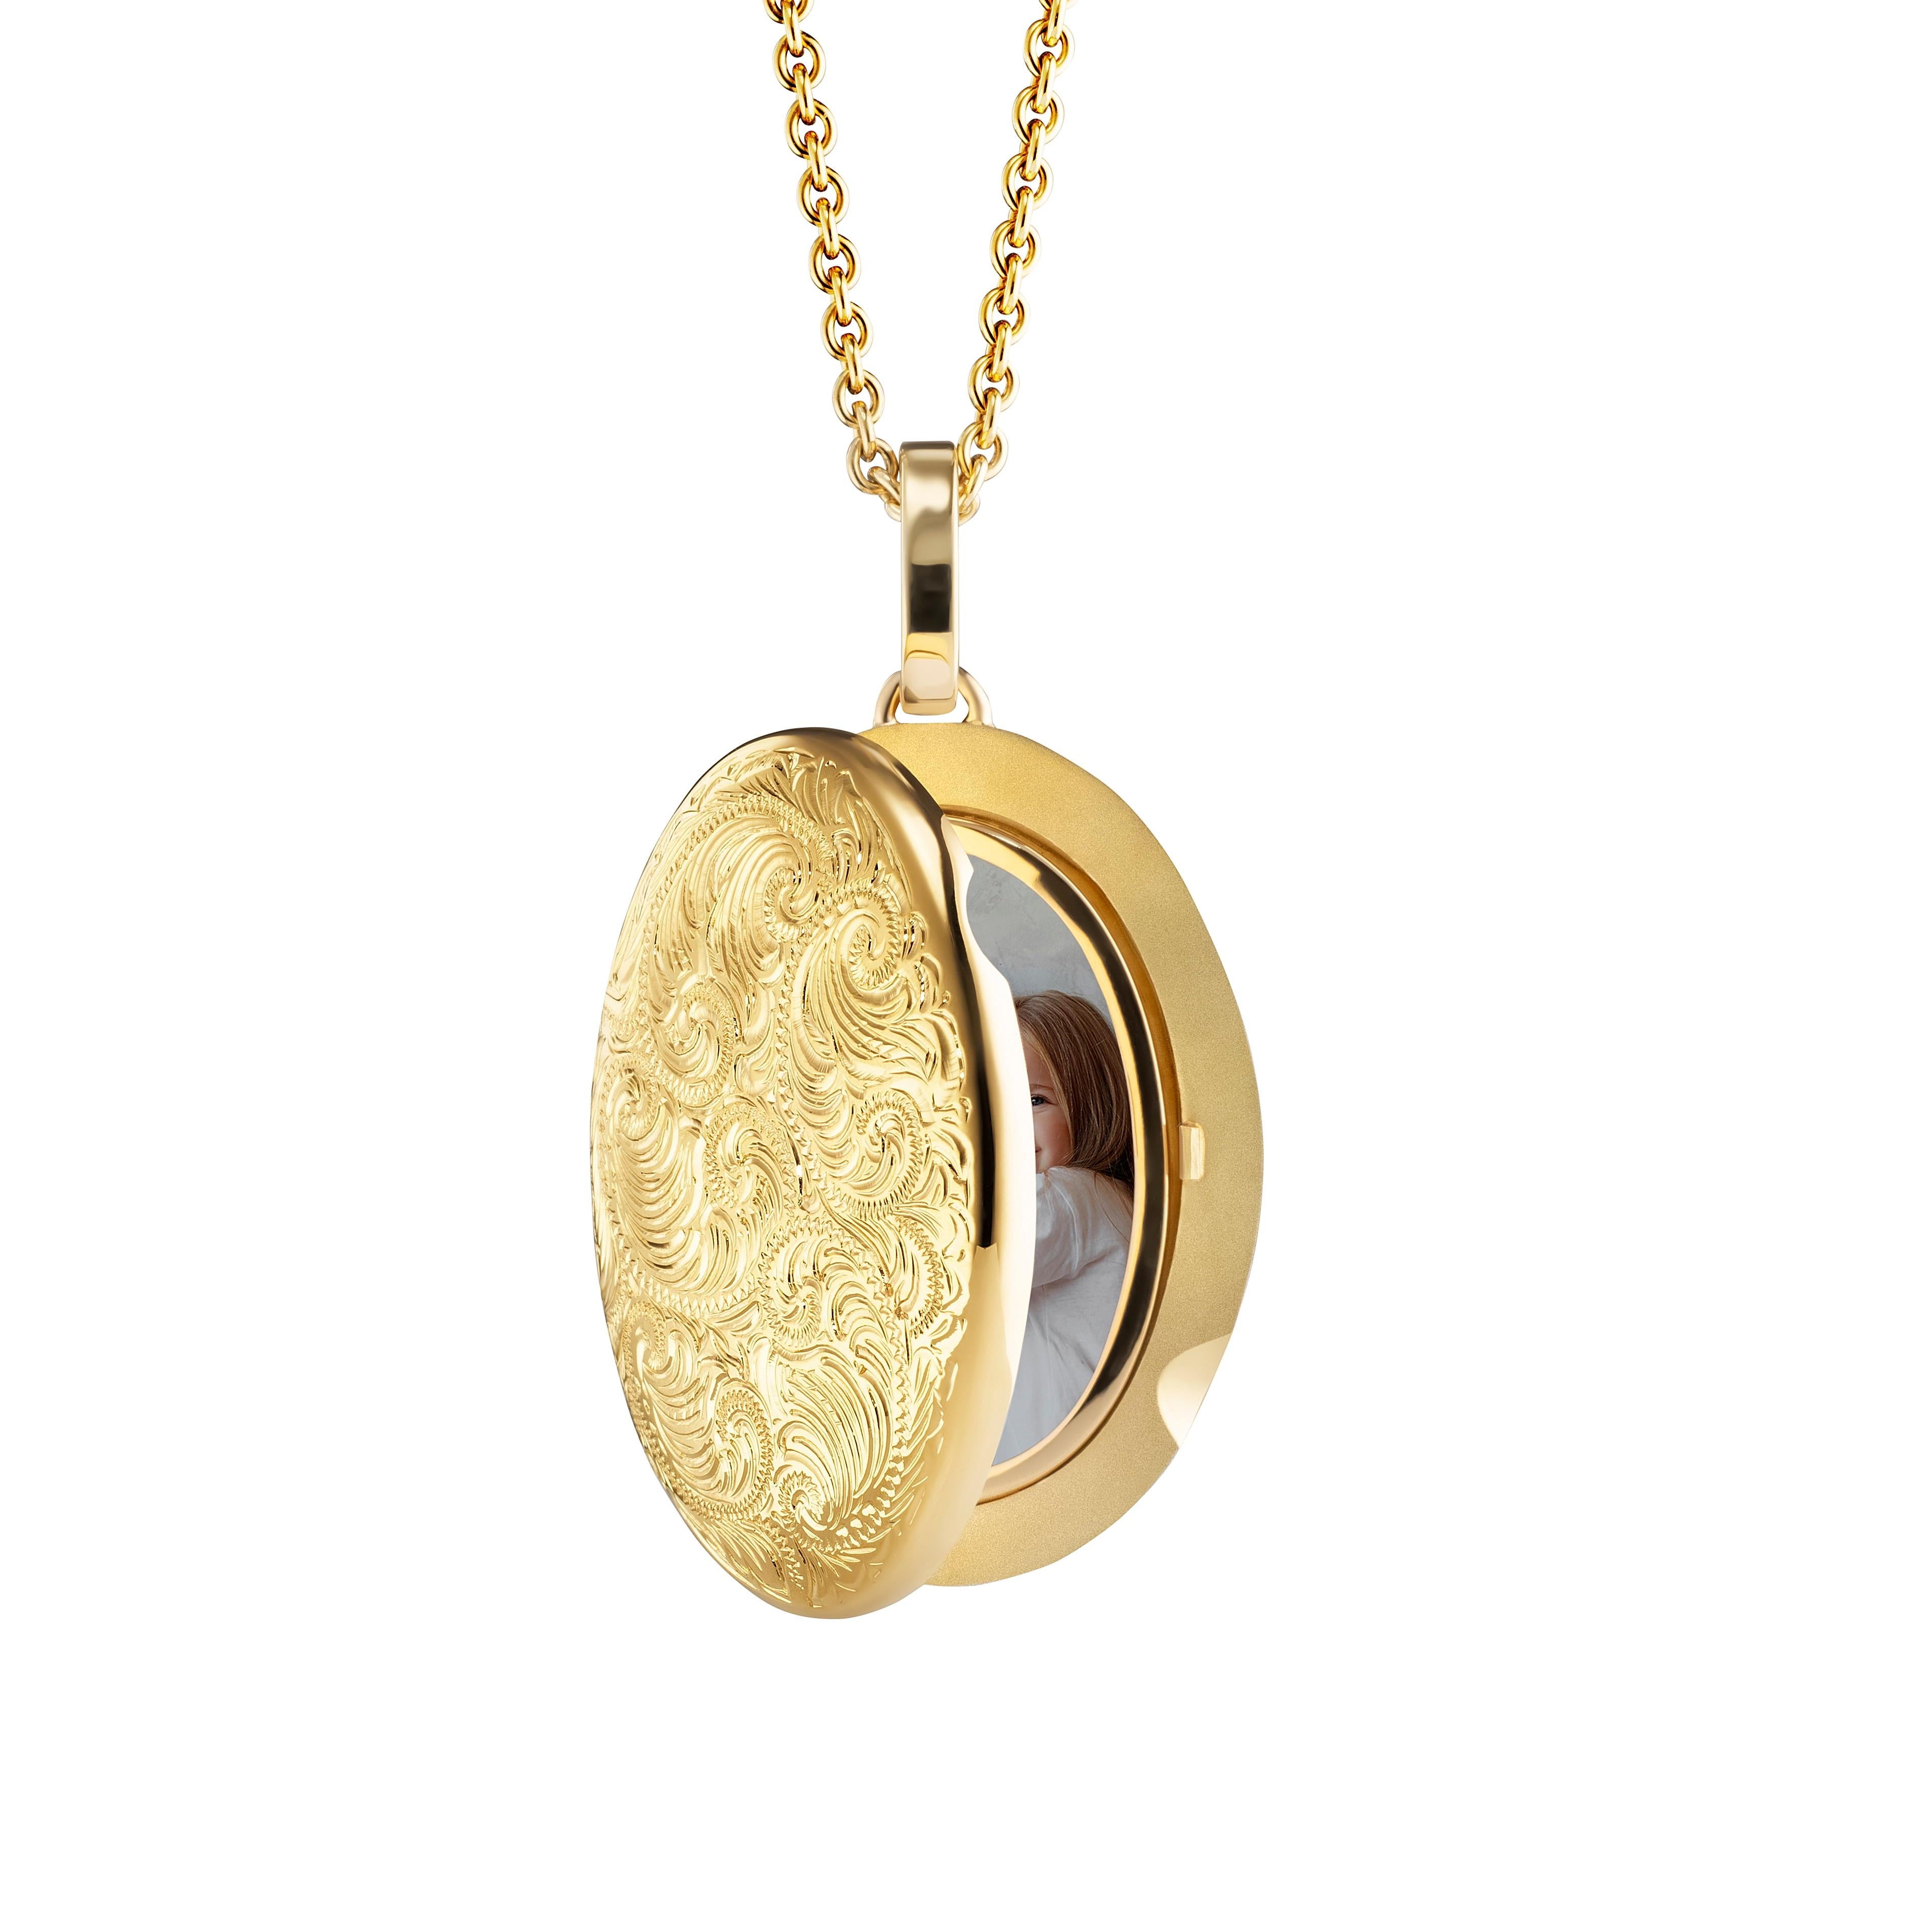 Belle Époque Oval Locket Pendant with Scroll Engraving - 18k Yellow Gold - 32.0 x 23.0 mm For Sale